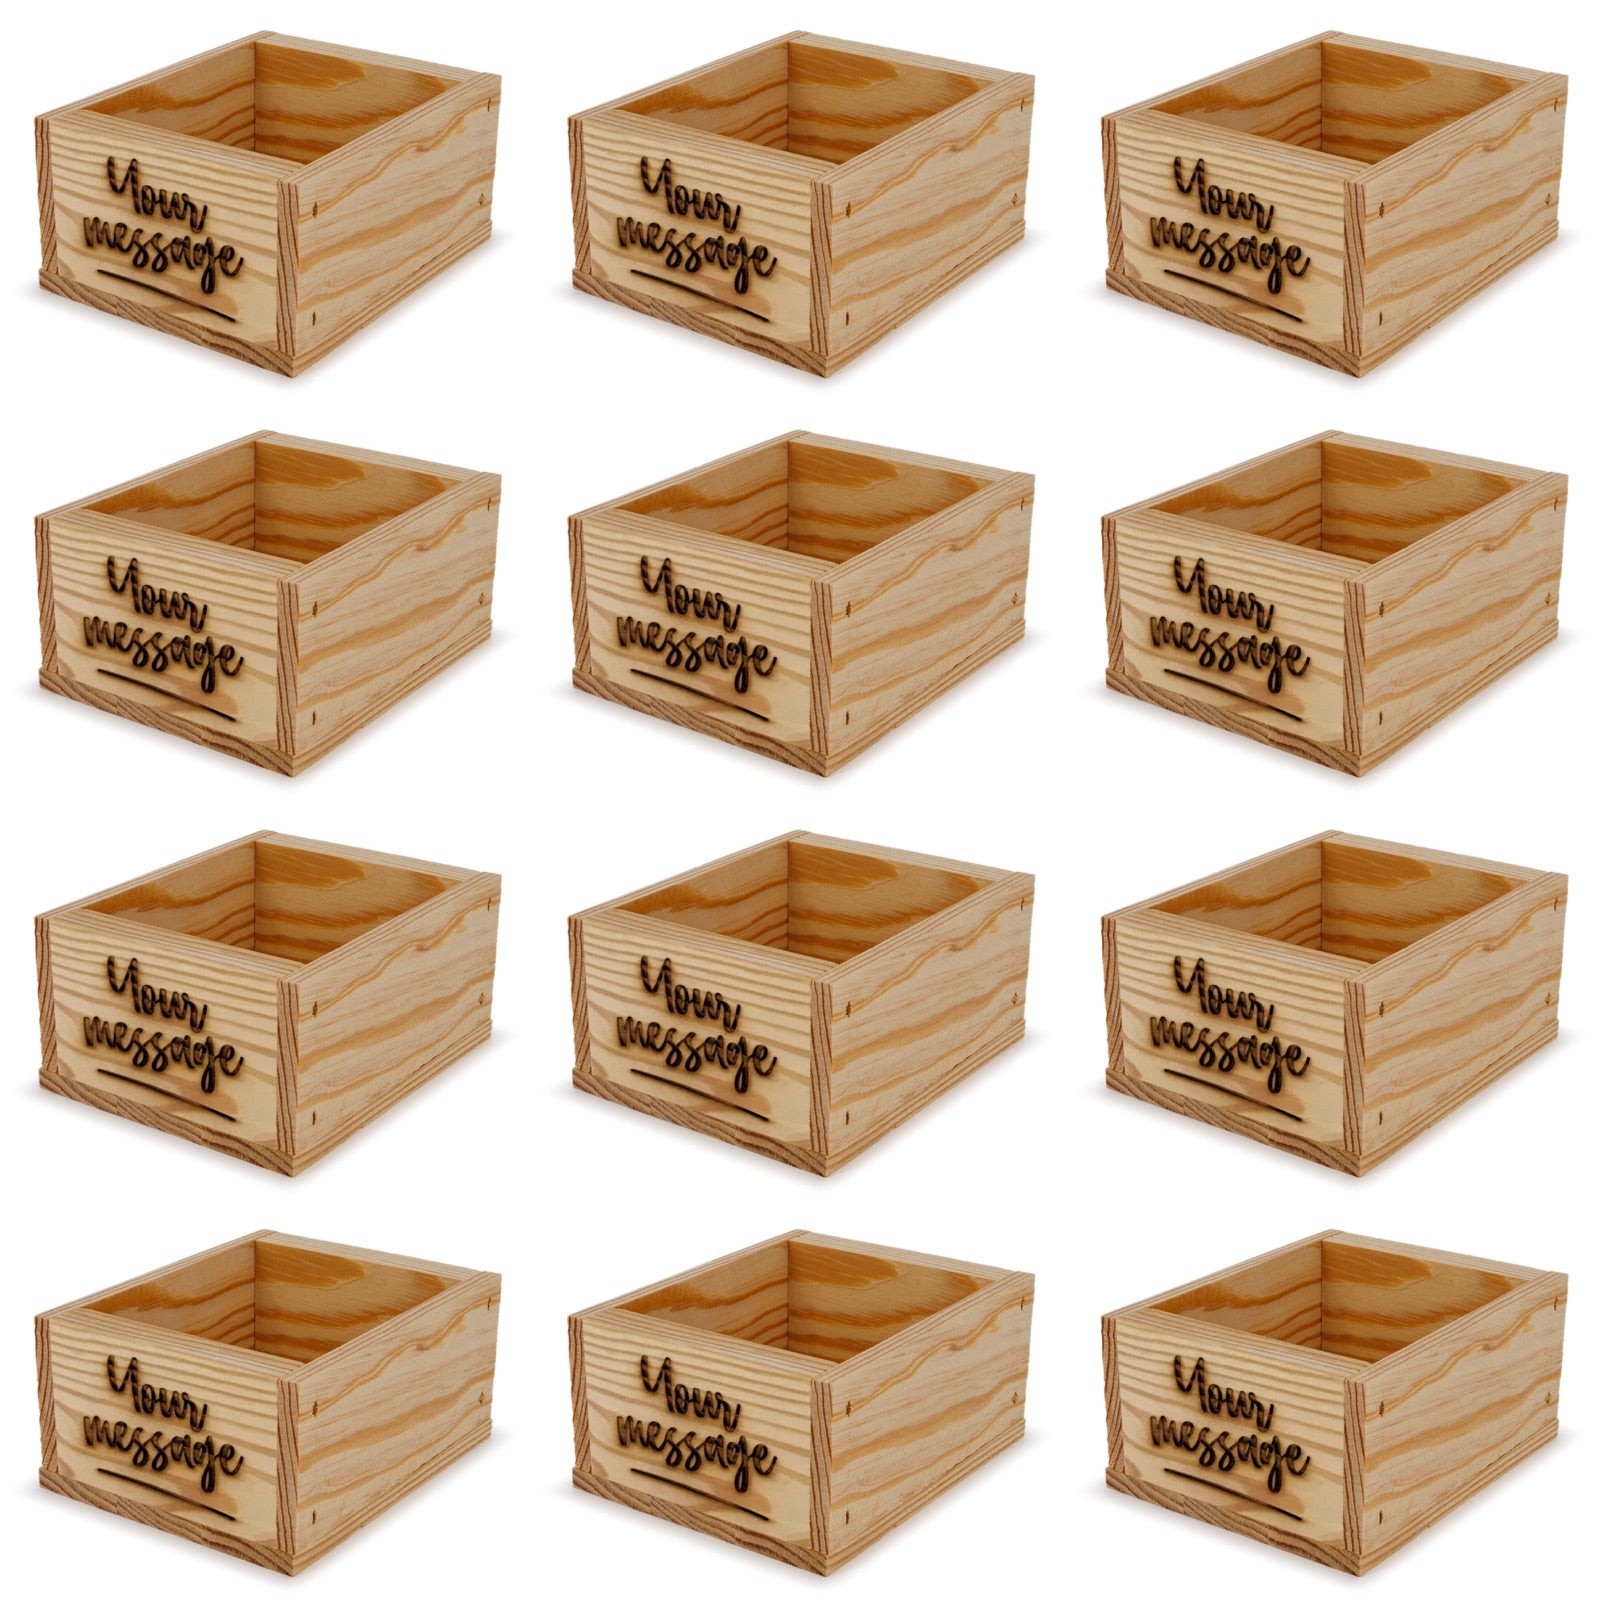 12 Small wooden crates with custom message 5x4.5x2.75